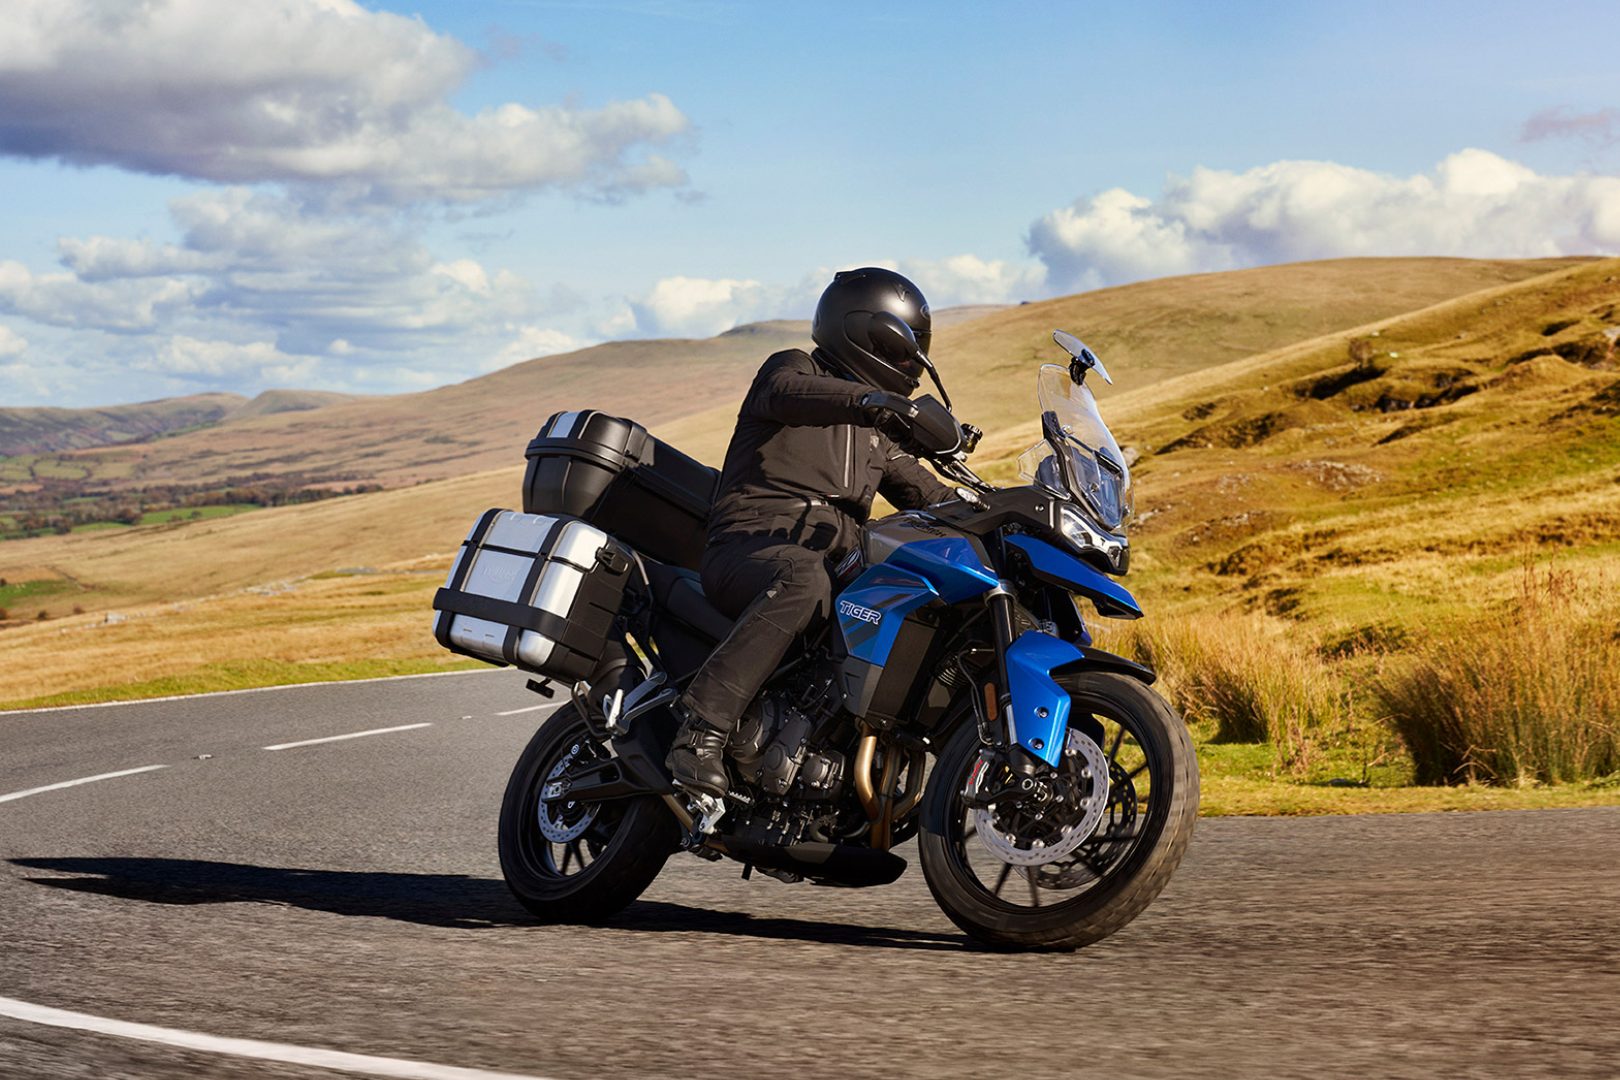 On The Attack â Triumph Tiger 850 Sport Launched - Motoring World